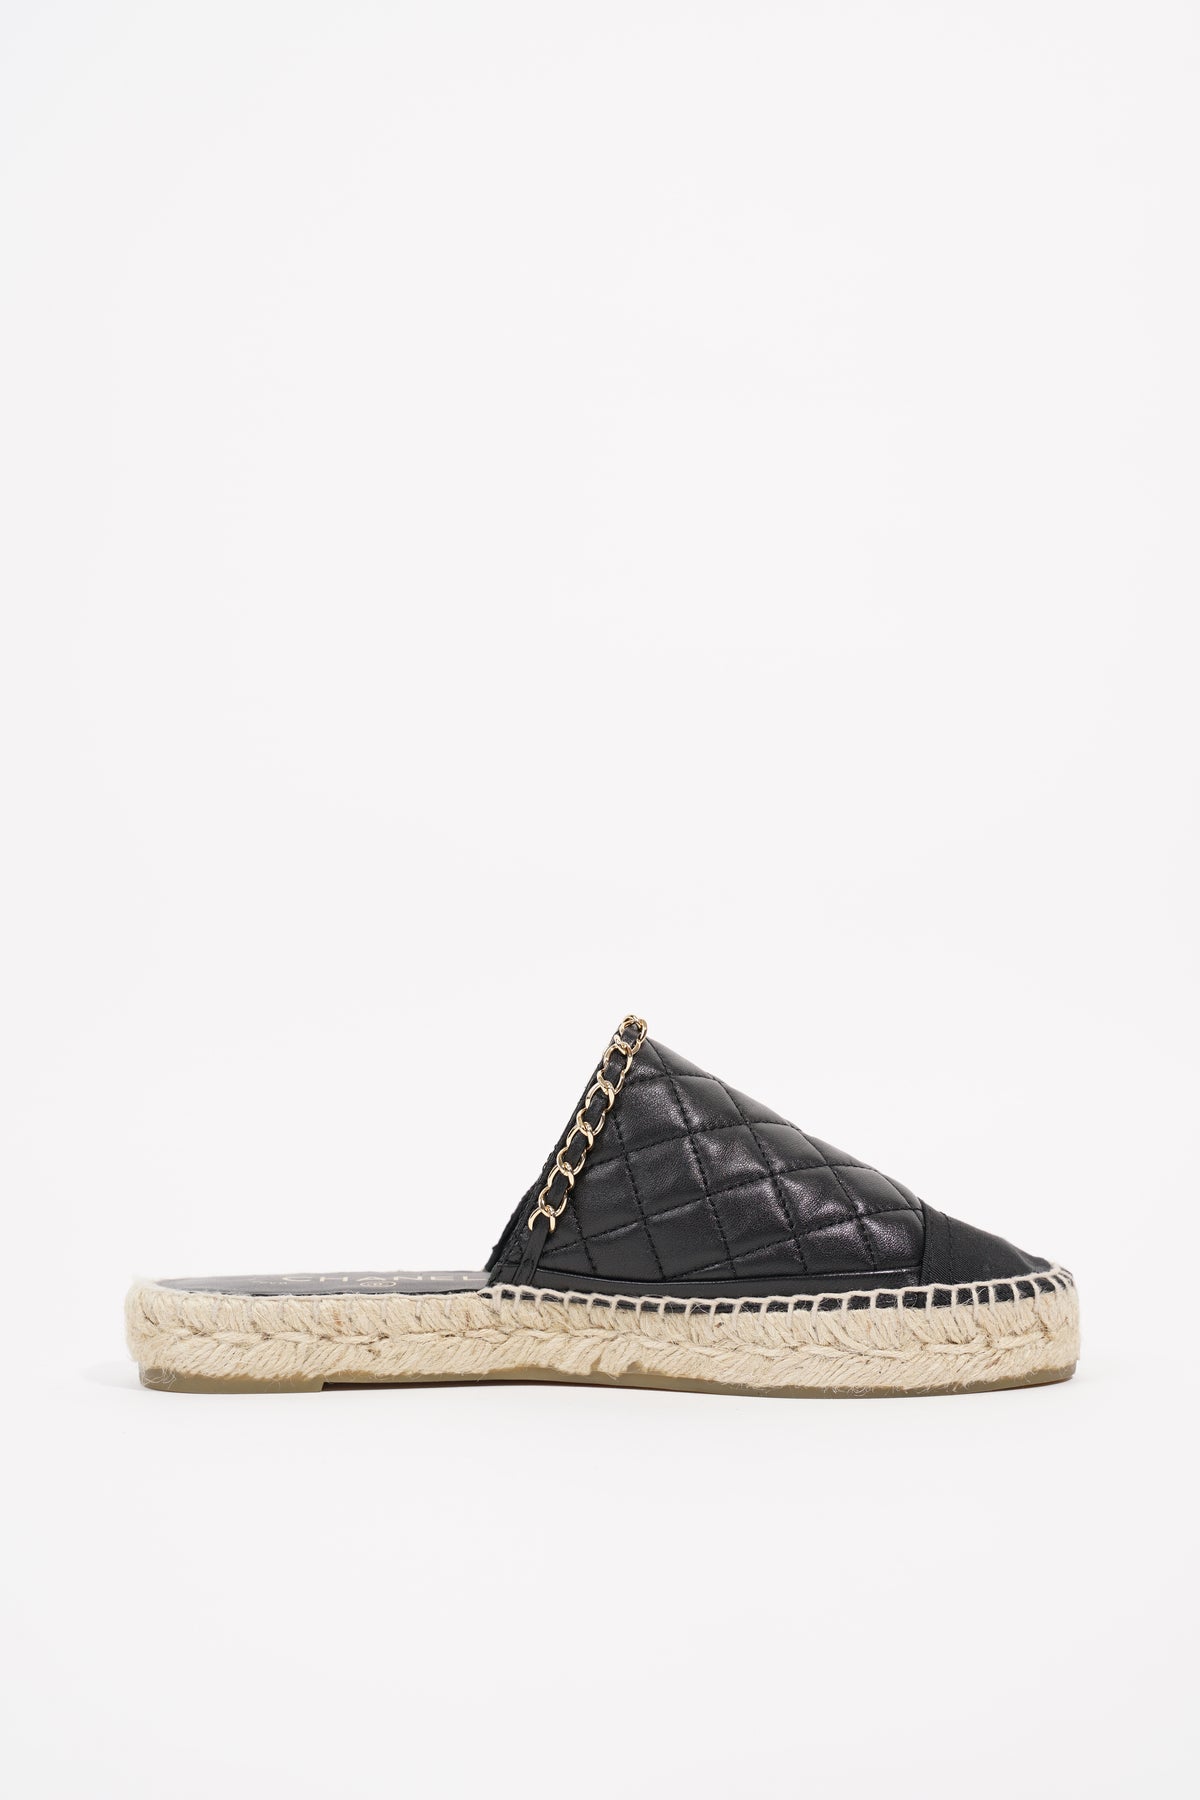 Chanel Espadrille White Mesh Leather Canvas Flat SOLD OUT Size 35